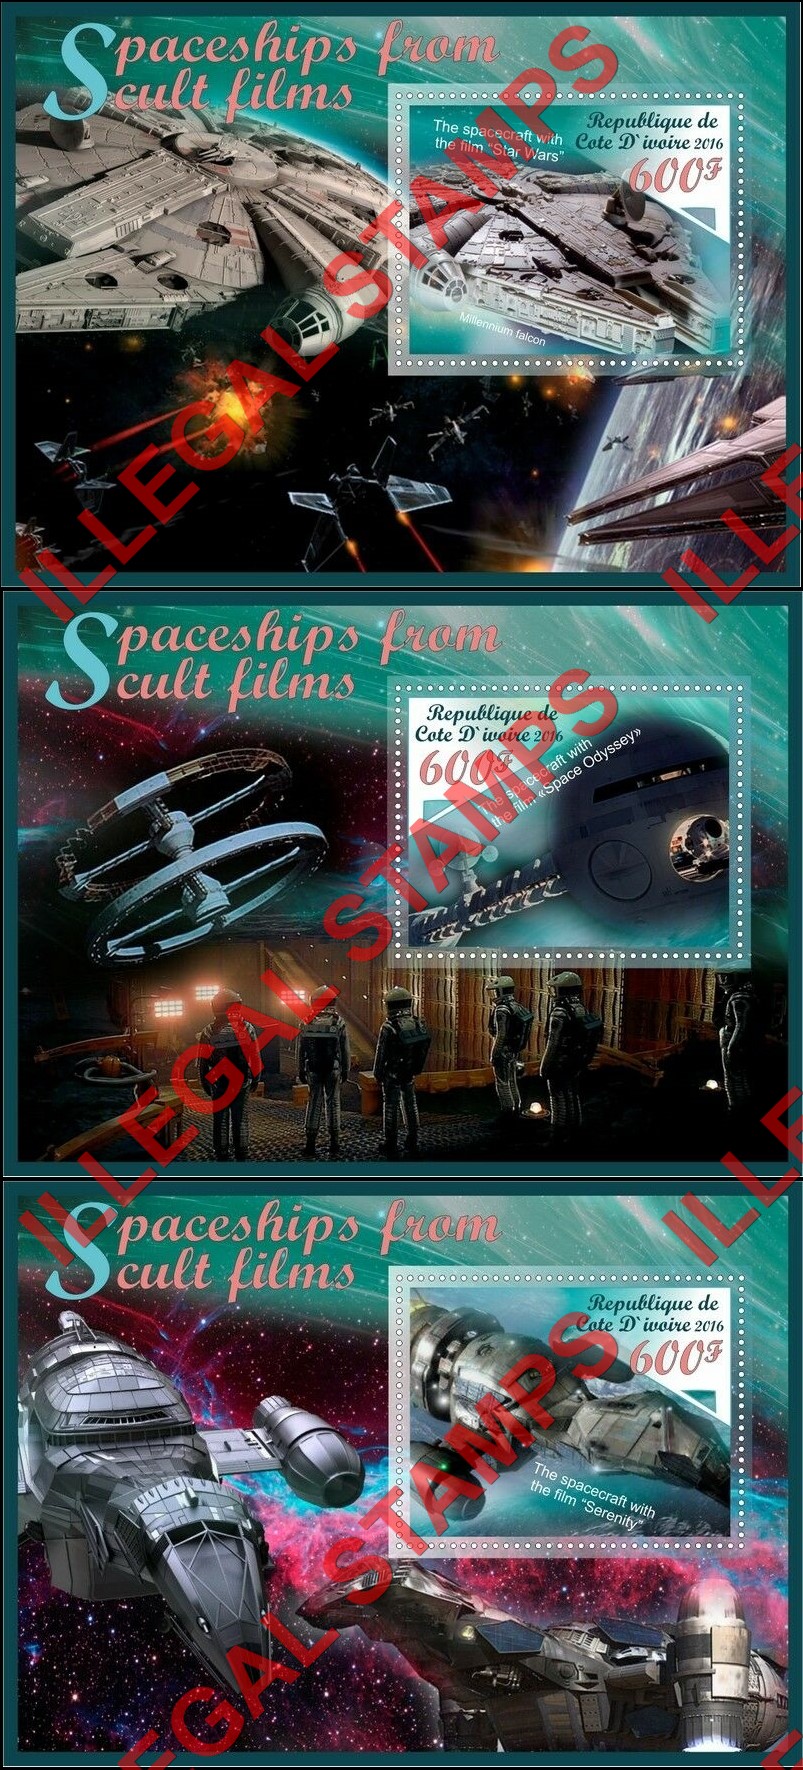 Djibouti 2016 Spaceships From Cult Films Illegal Stamp Souvenir Sheets of 1 (Part 1)